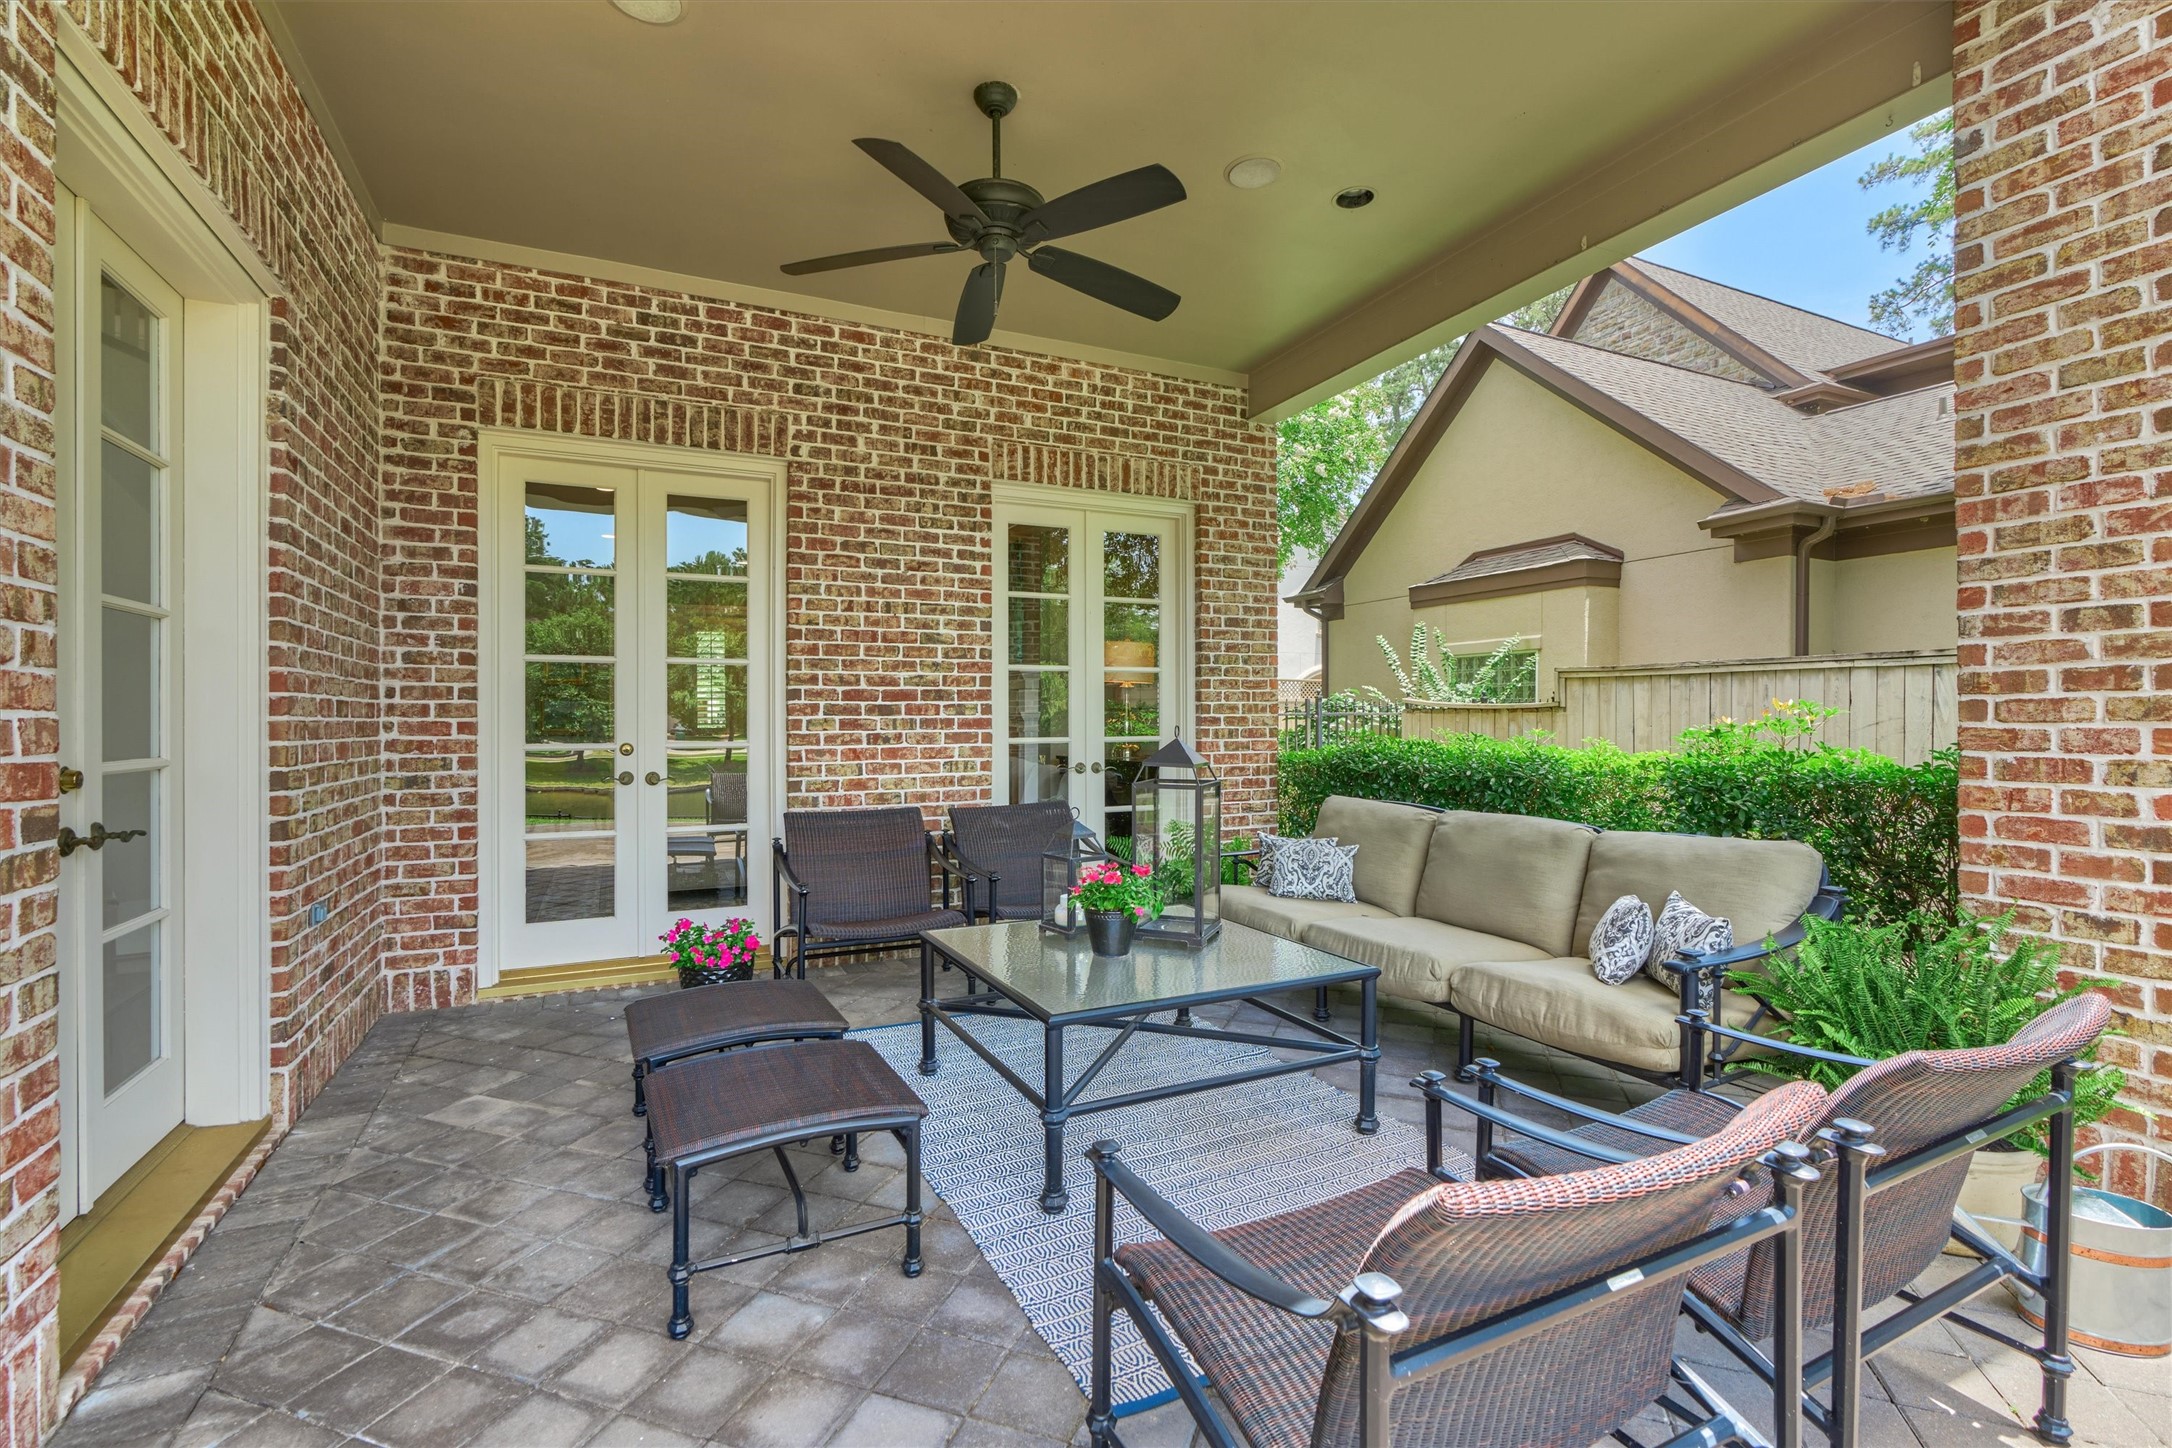 Perfect place to gather with friends on the large back covered patio with ceiling fan.